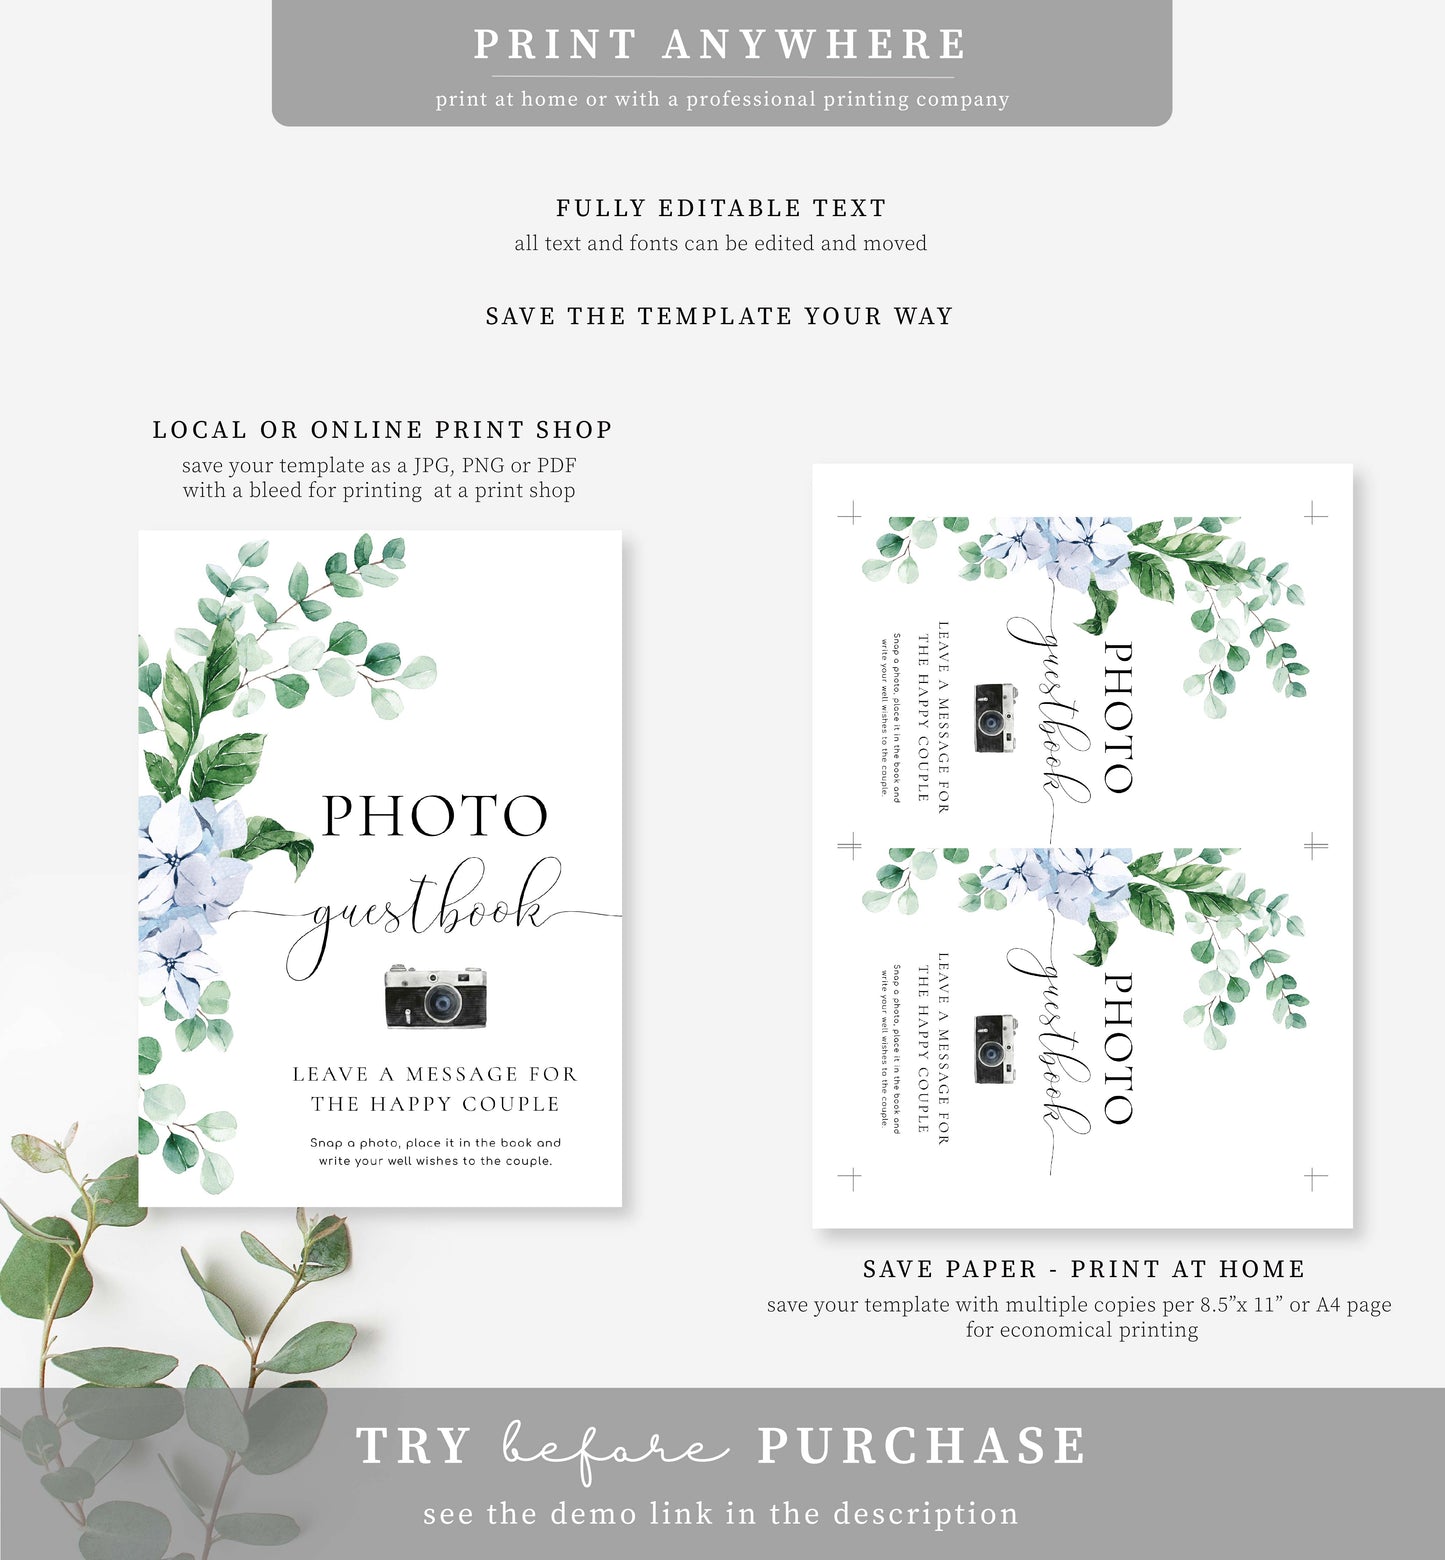 Ferras Blue | Printable Photo Guestbook Sign Template